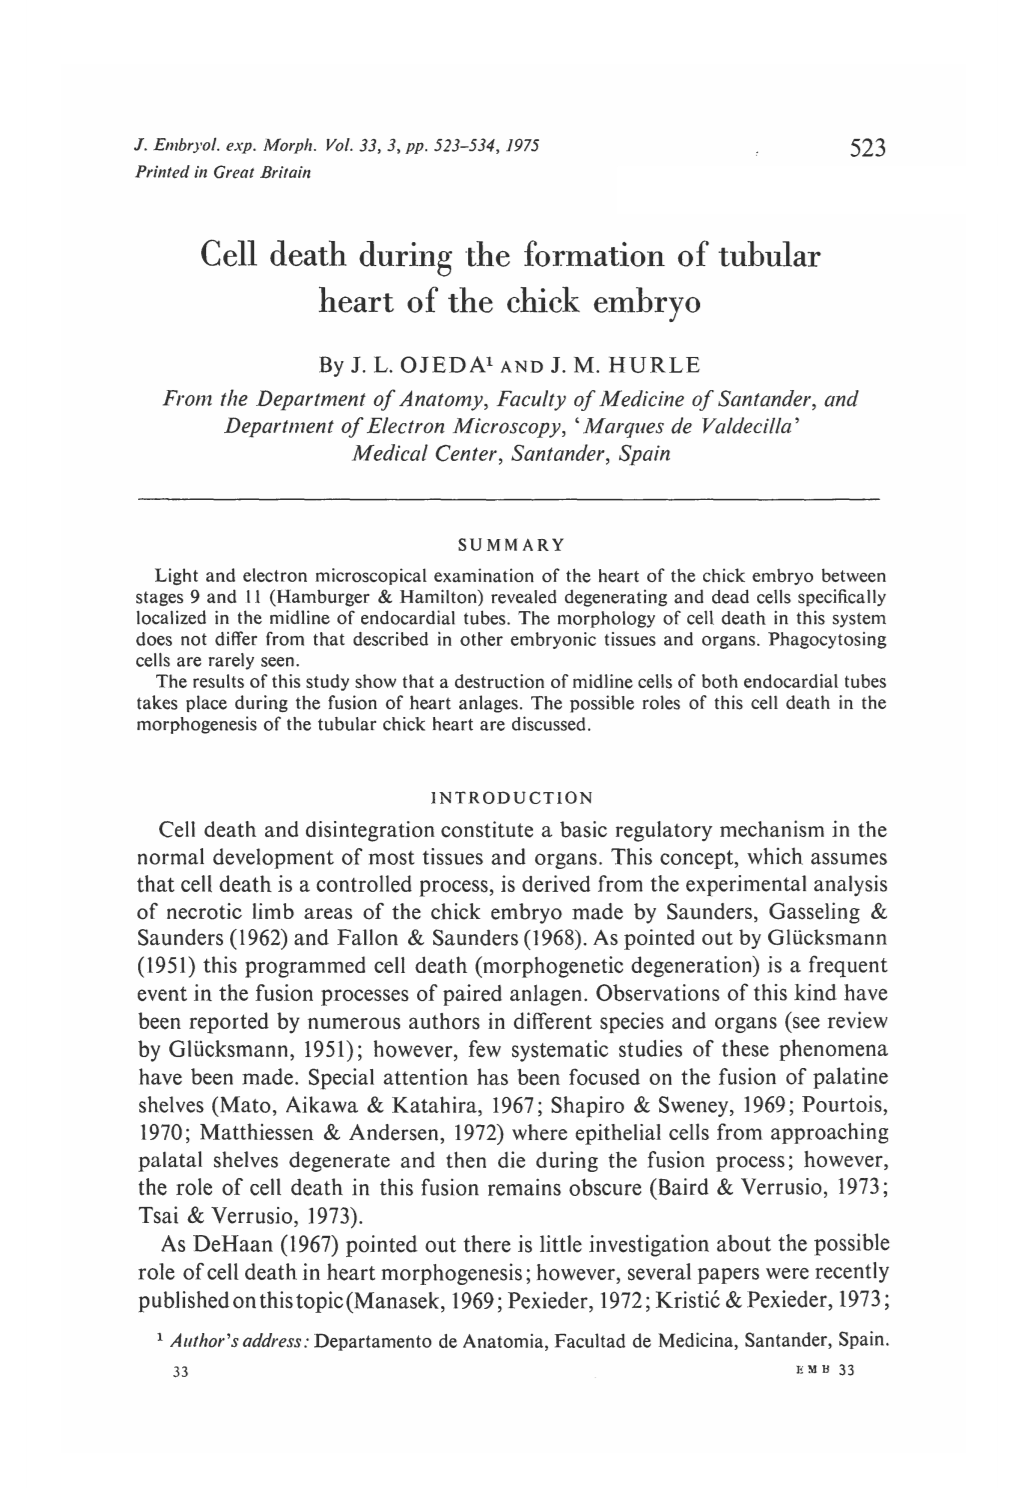 Cell Death During the Formation of Tubular Heart of the Chick Embryo